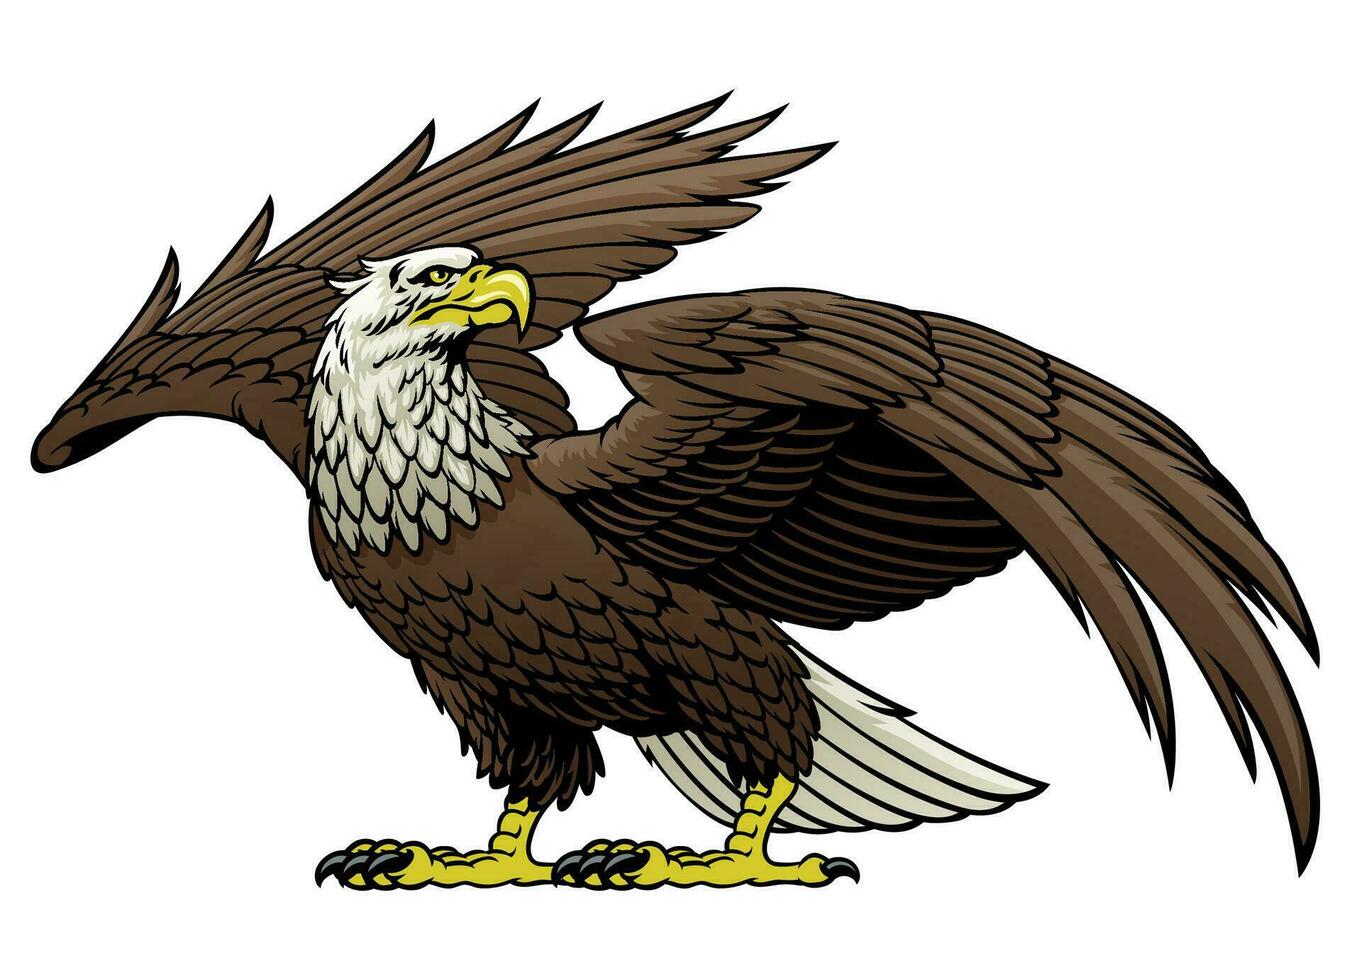 Eagle hand drawn illustration in side view vector